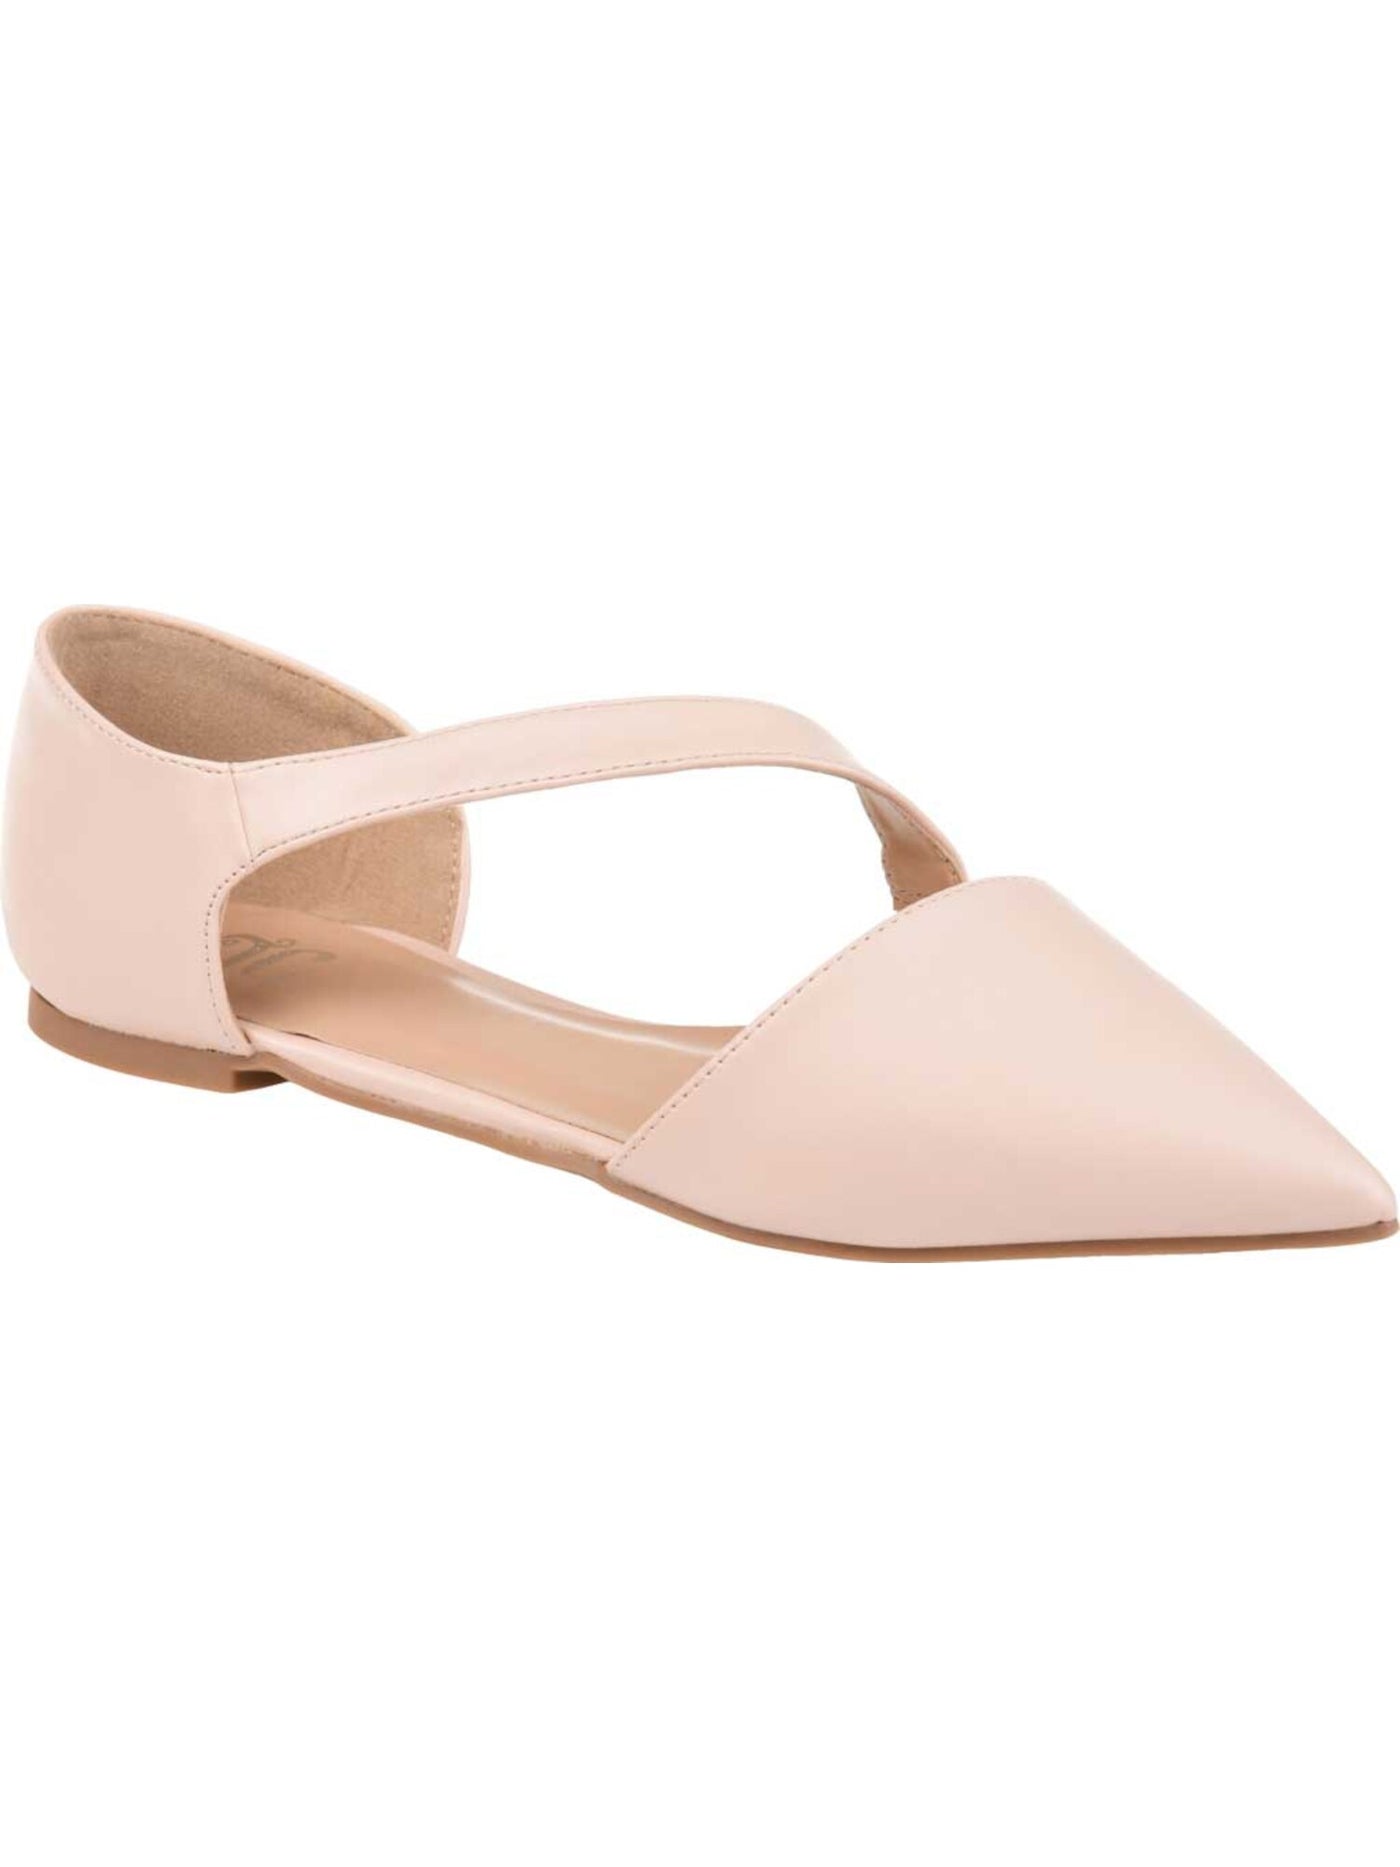 JOURNEE COLLECTION Womens Pink Padded Lanet Pointed Toe Slip On Ballet Flats 6.5